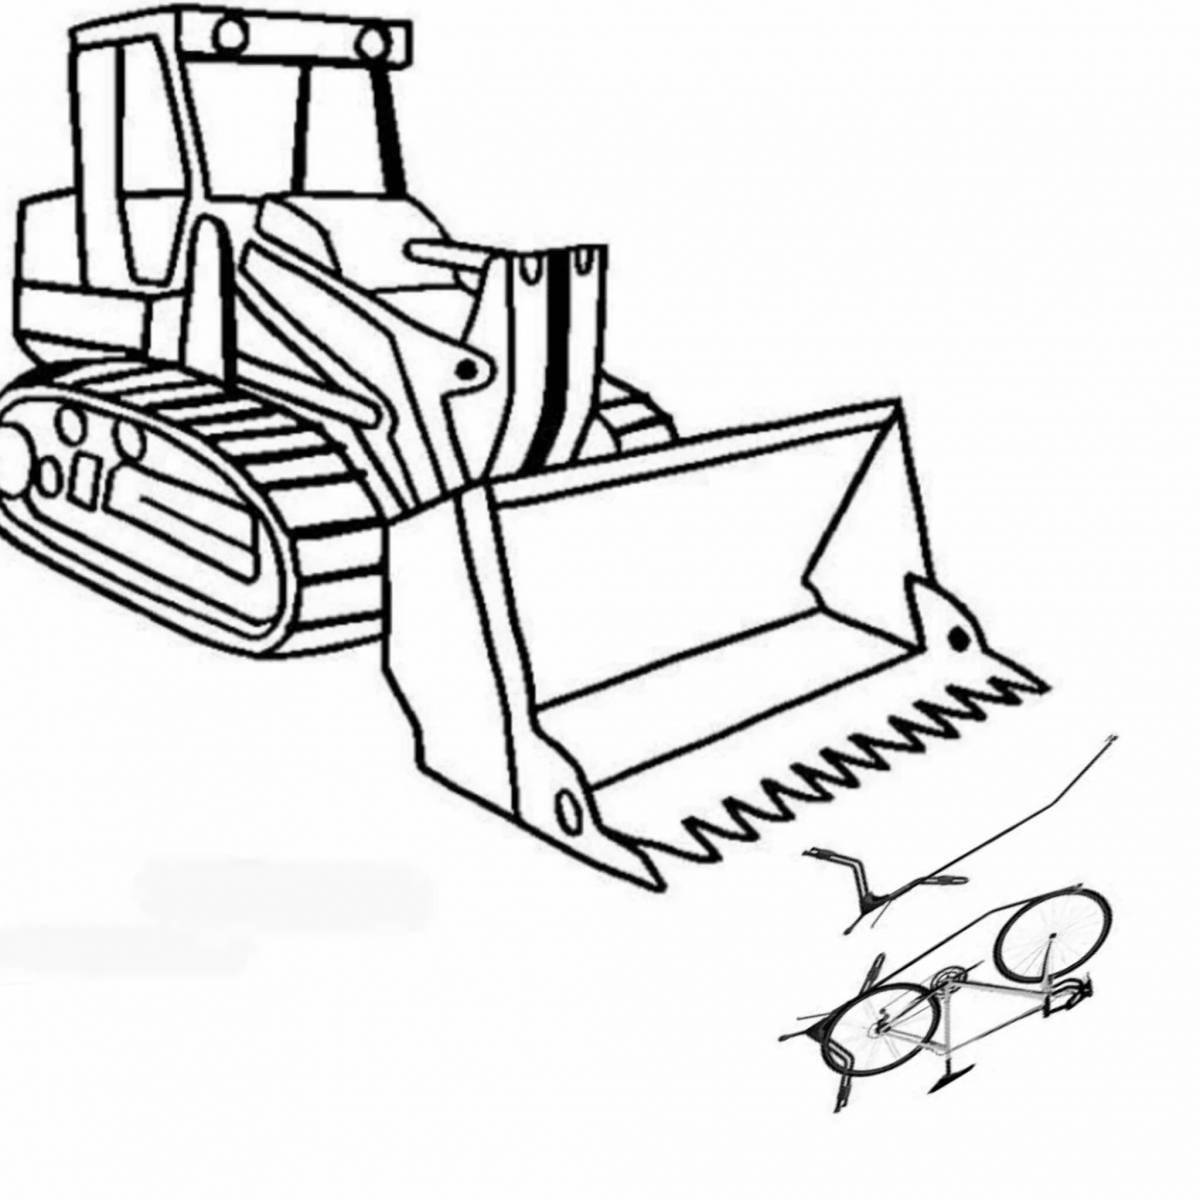 Cute bulldozer coloring pages for kids